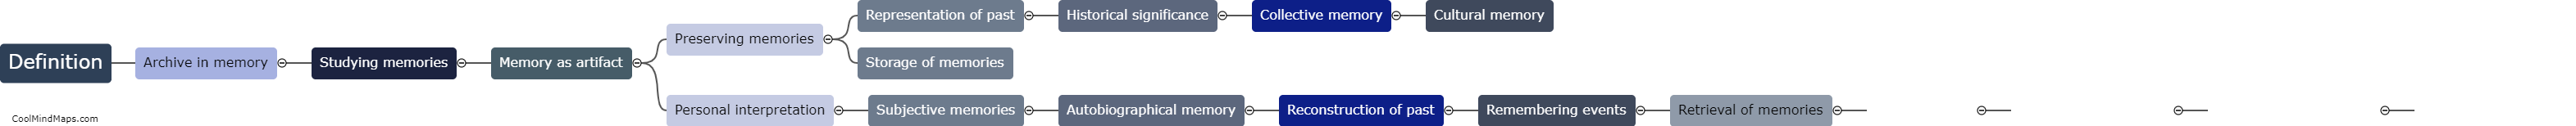 What is the definition of archive in memory studies?